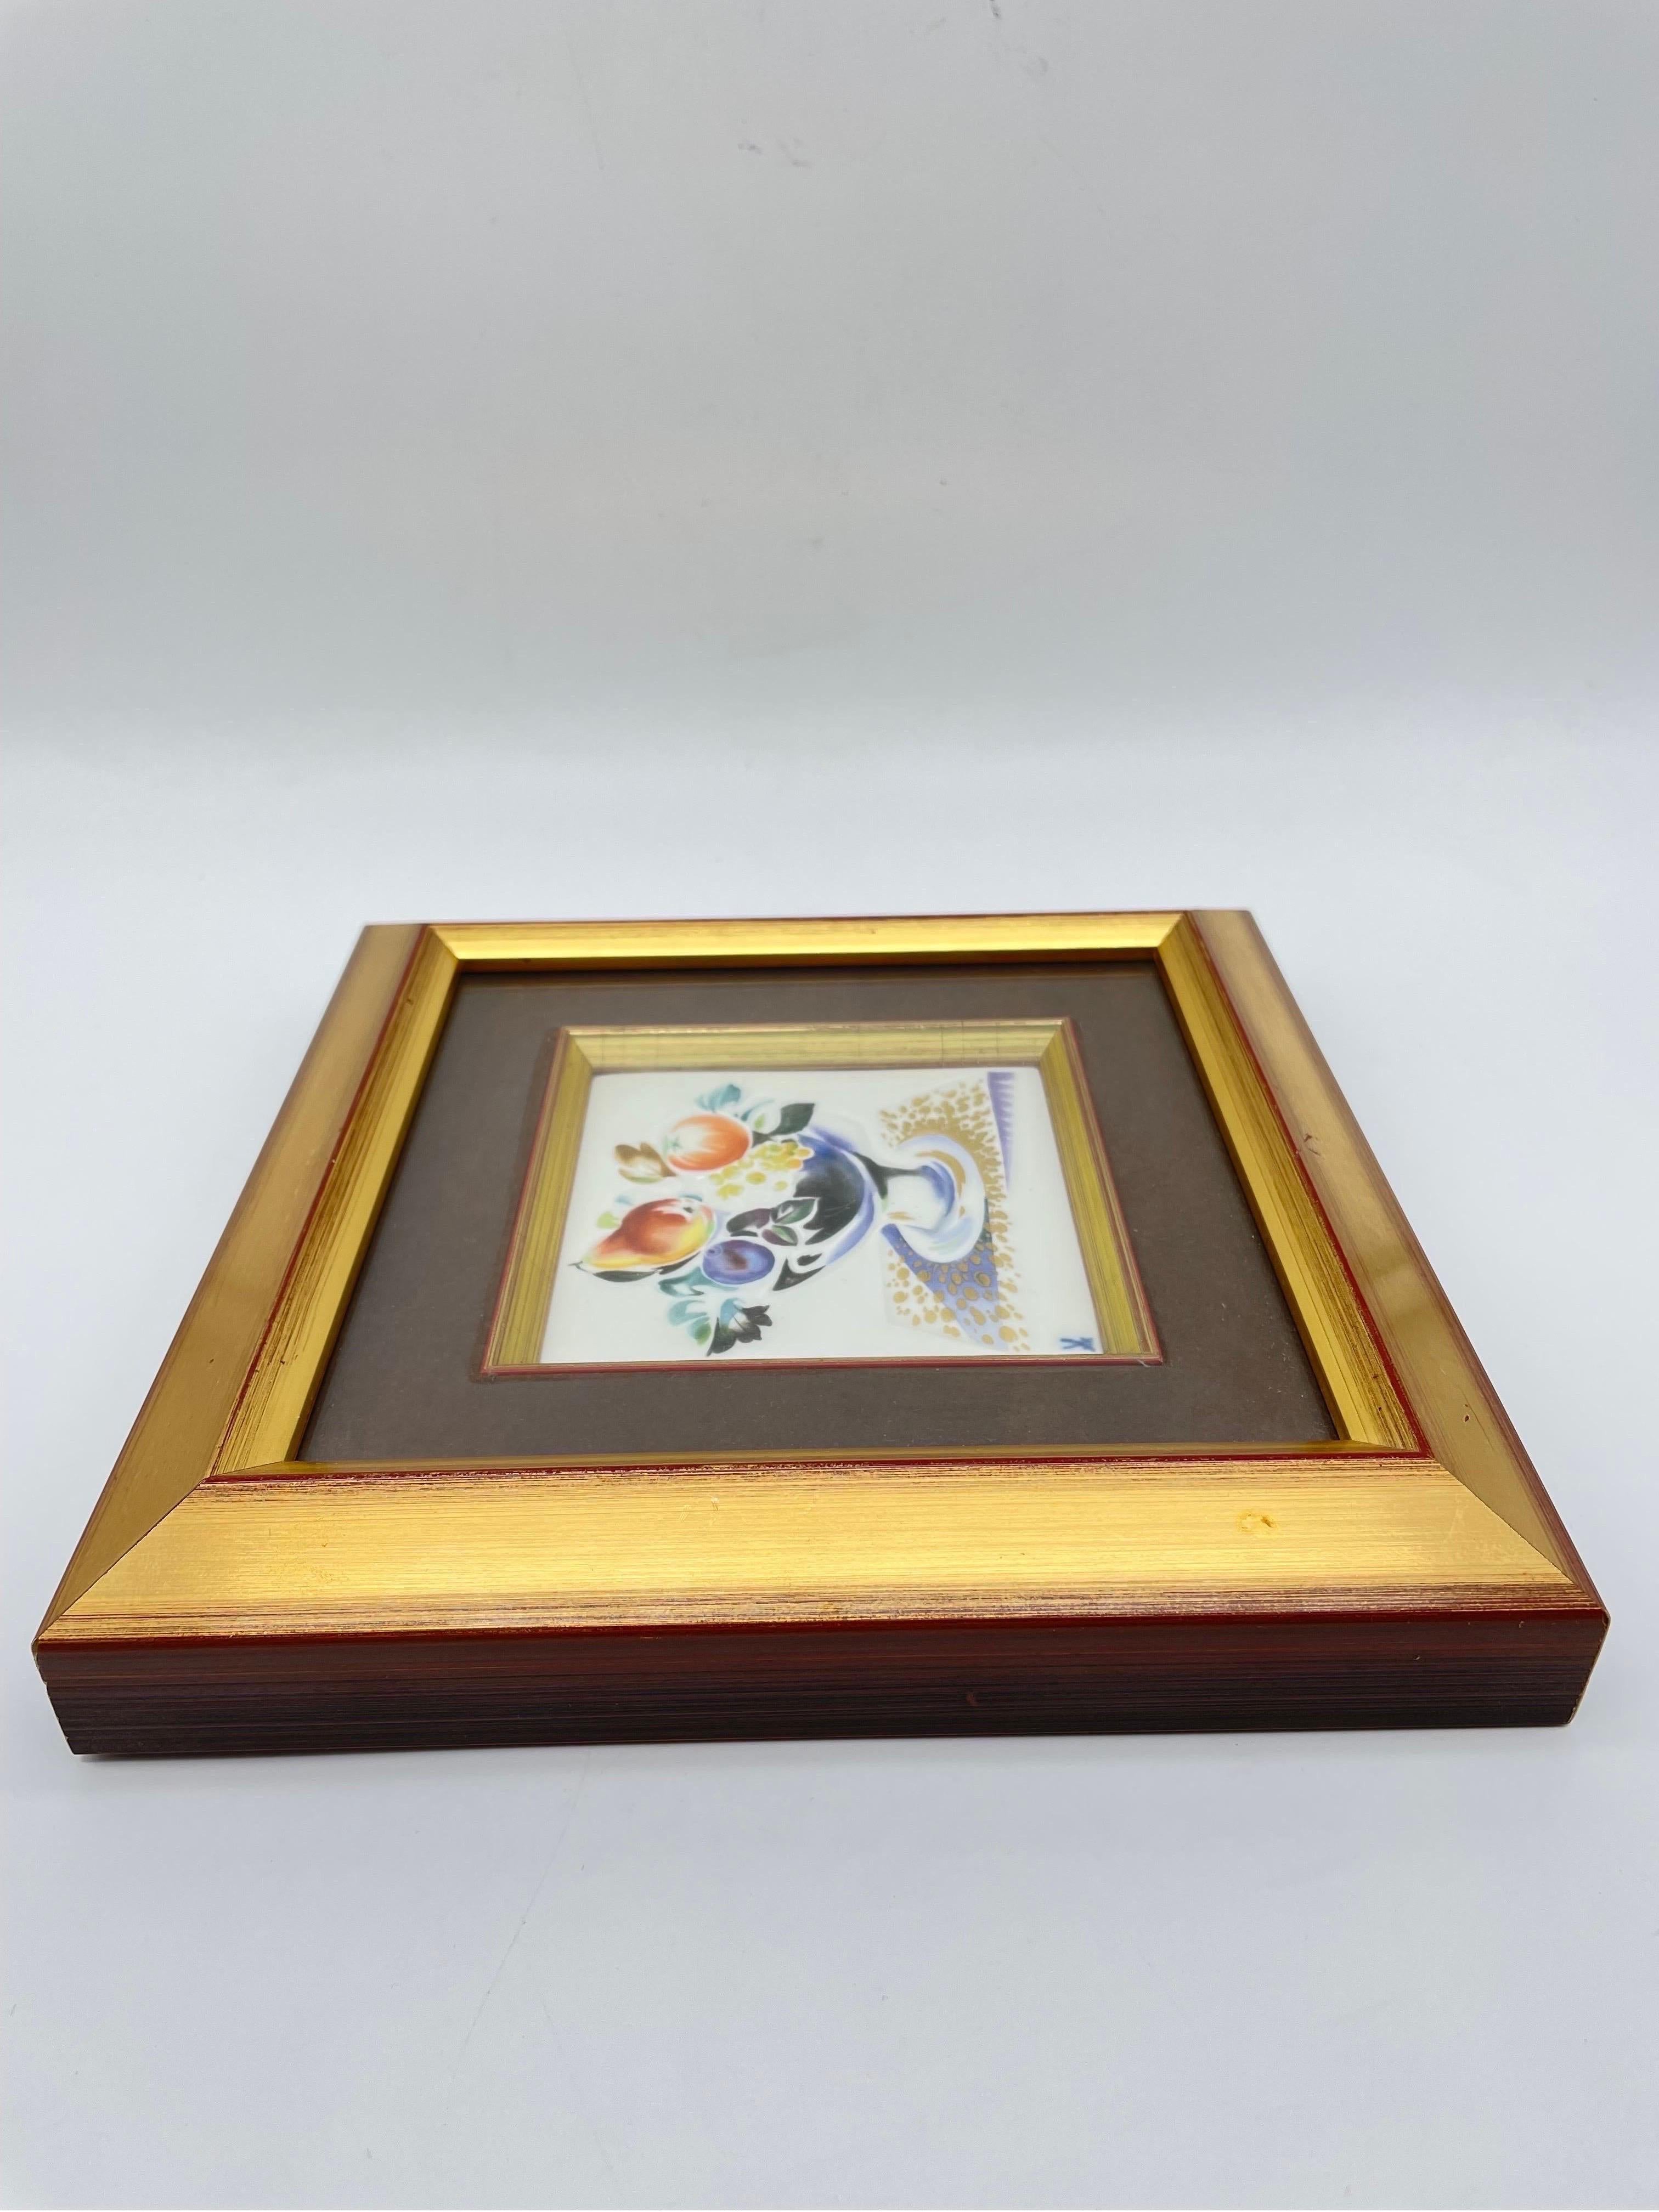 Porcelain Meissen Picture Plate/Relief Plate Fruit Painting, Professor Heinz Werner #2 For Sale